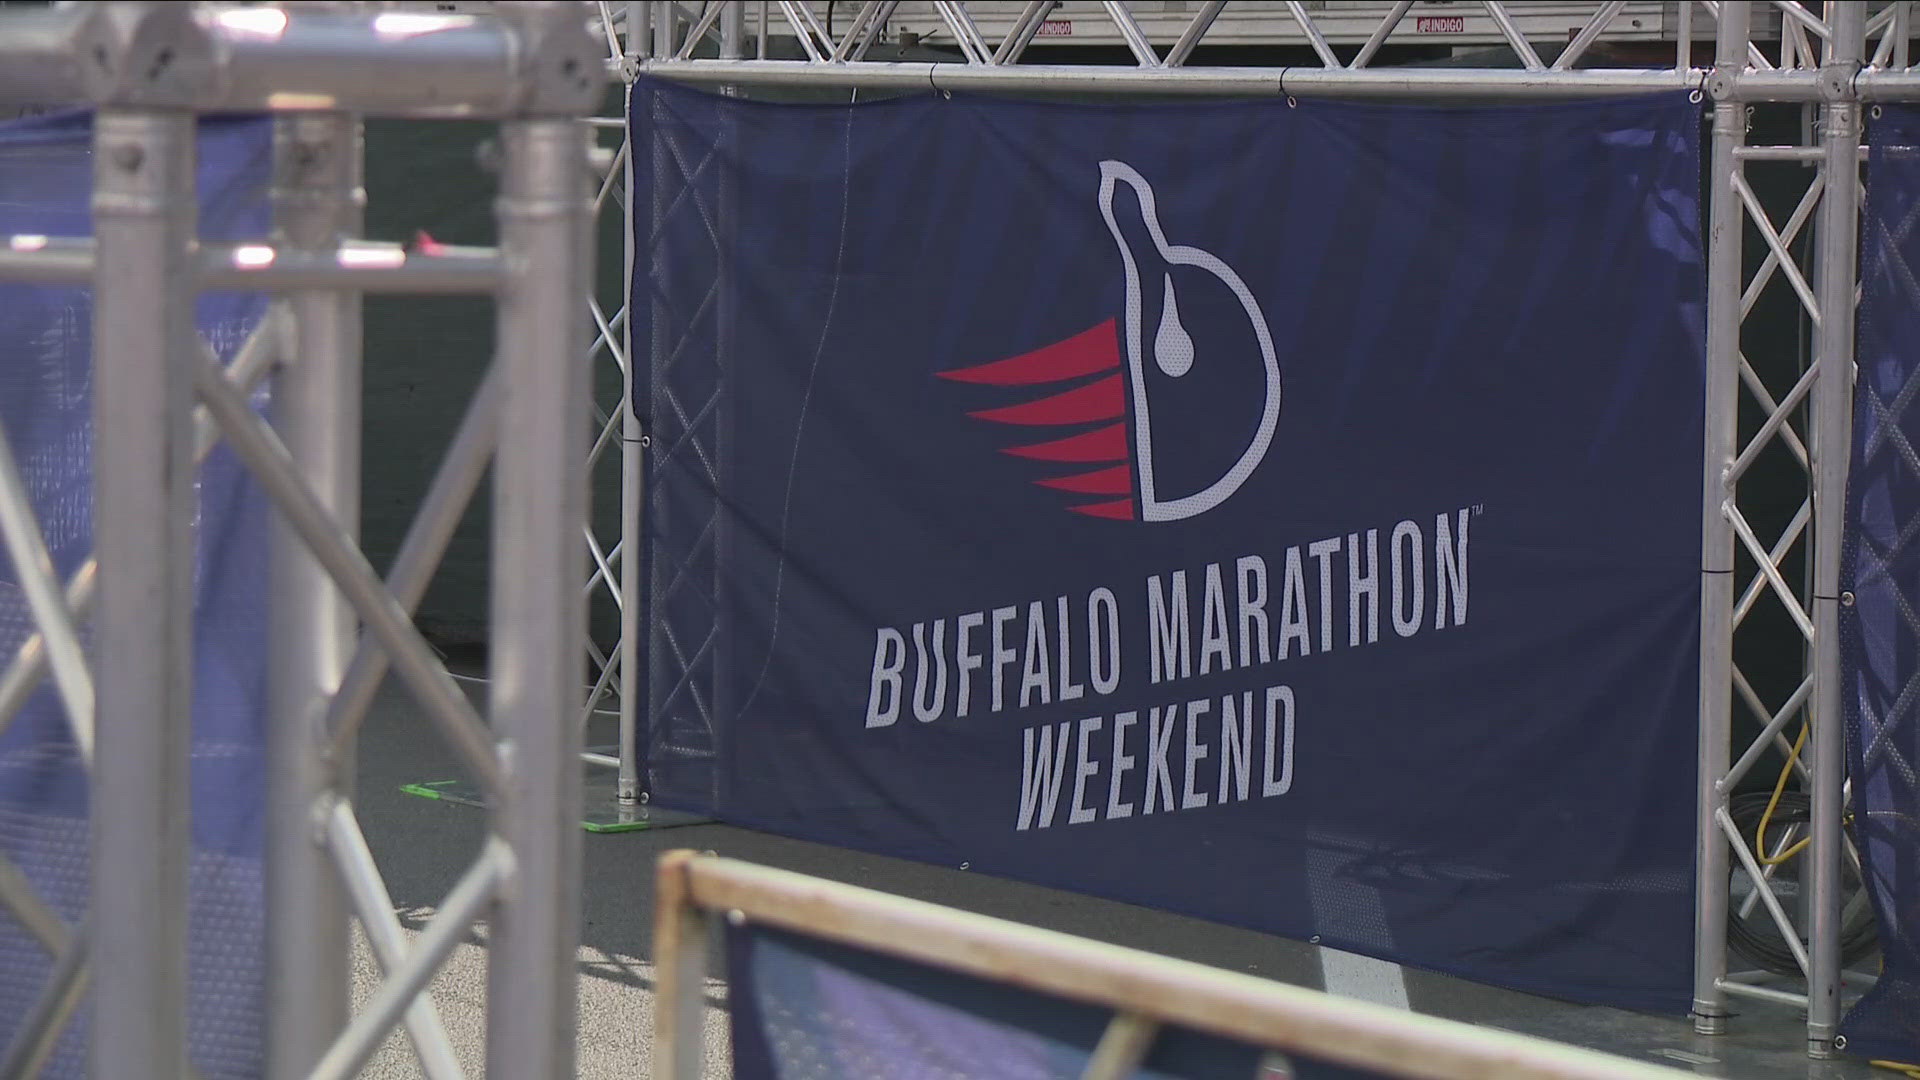 Road closures will go into effect at noon on Friday and end at 3 p.m. Sunday in the City of Buffalo for the marathon weekend.